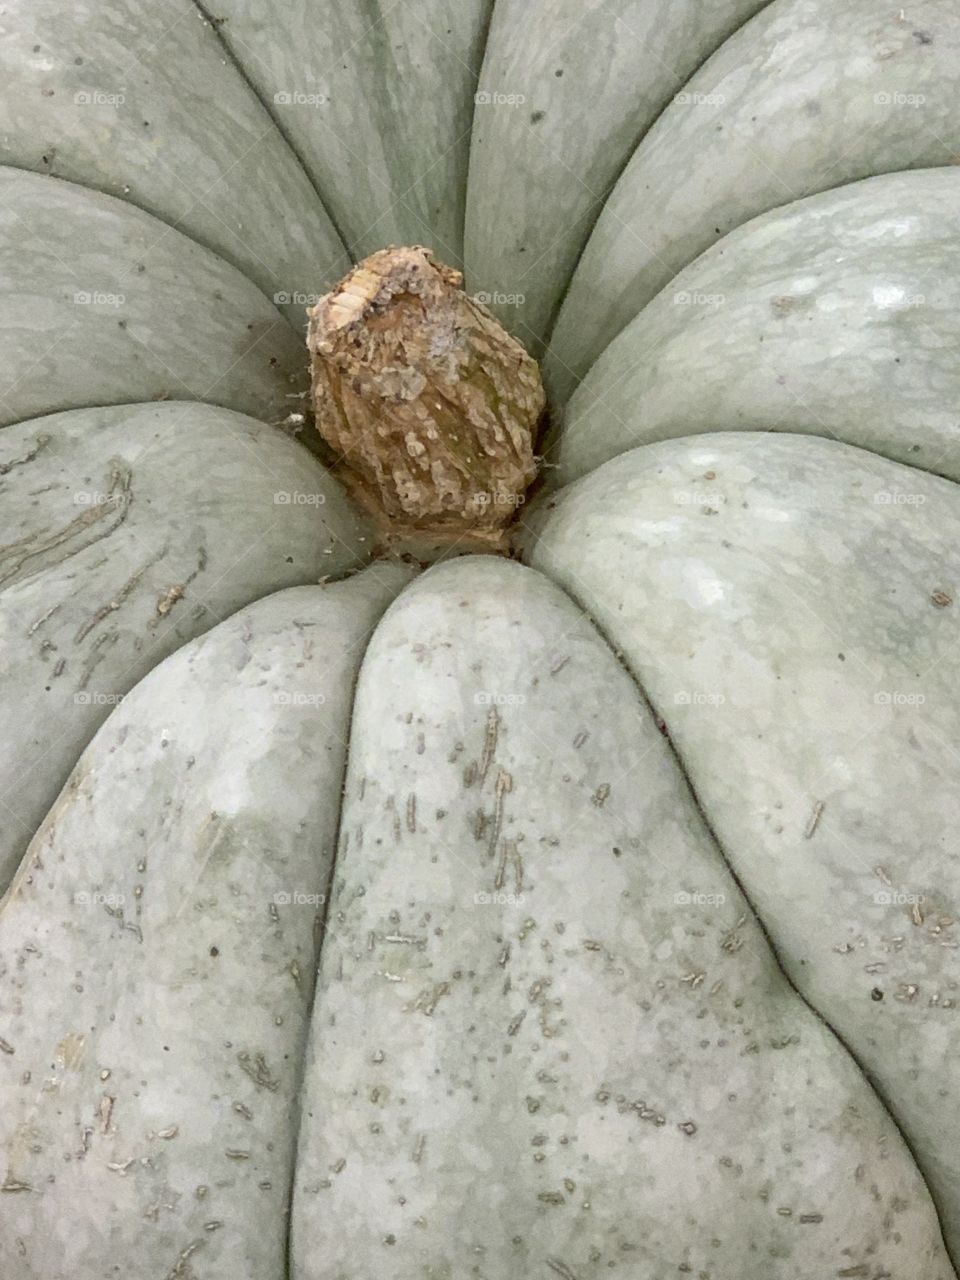 Squash in Green and Gray